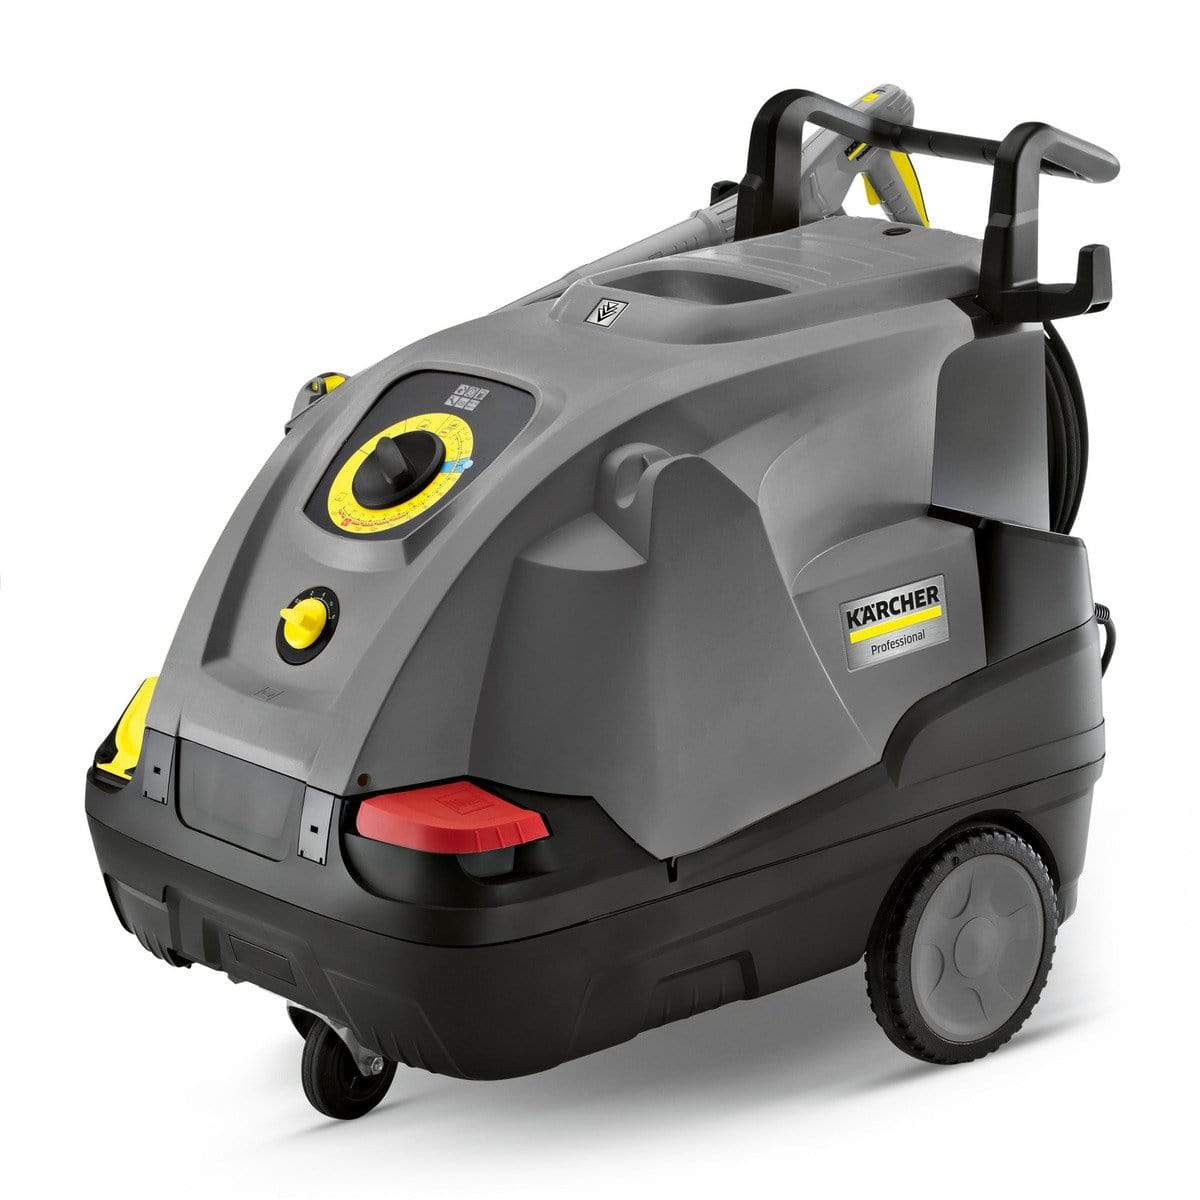 Karcher Hot and Cold High Pressure Washer 120 Bar - HDS 6/12 C | Supply Master | Accra, Ghana Tools Building Steel Engineering Hardware tool